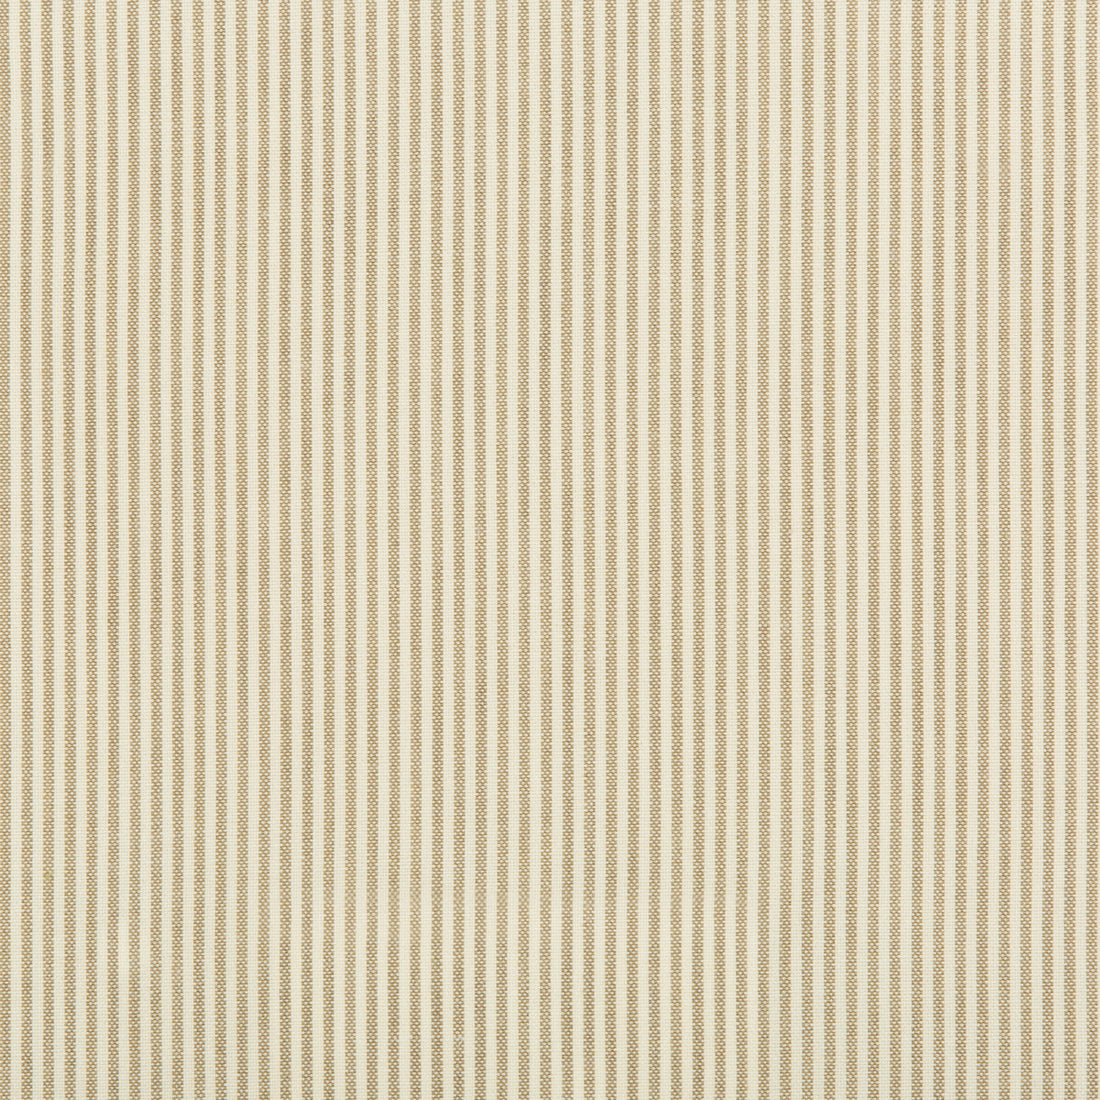 Kravet Basics fabric in 35374-106 color - pattern 35374.106.0 - by Kravet Basics in the Performance Indoor Outdoor collection